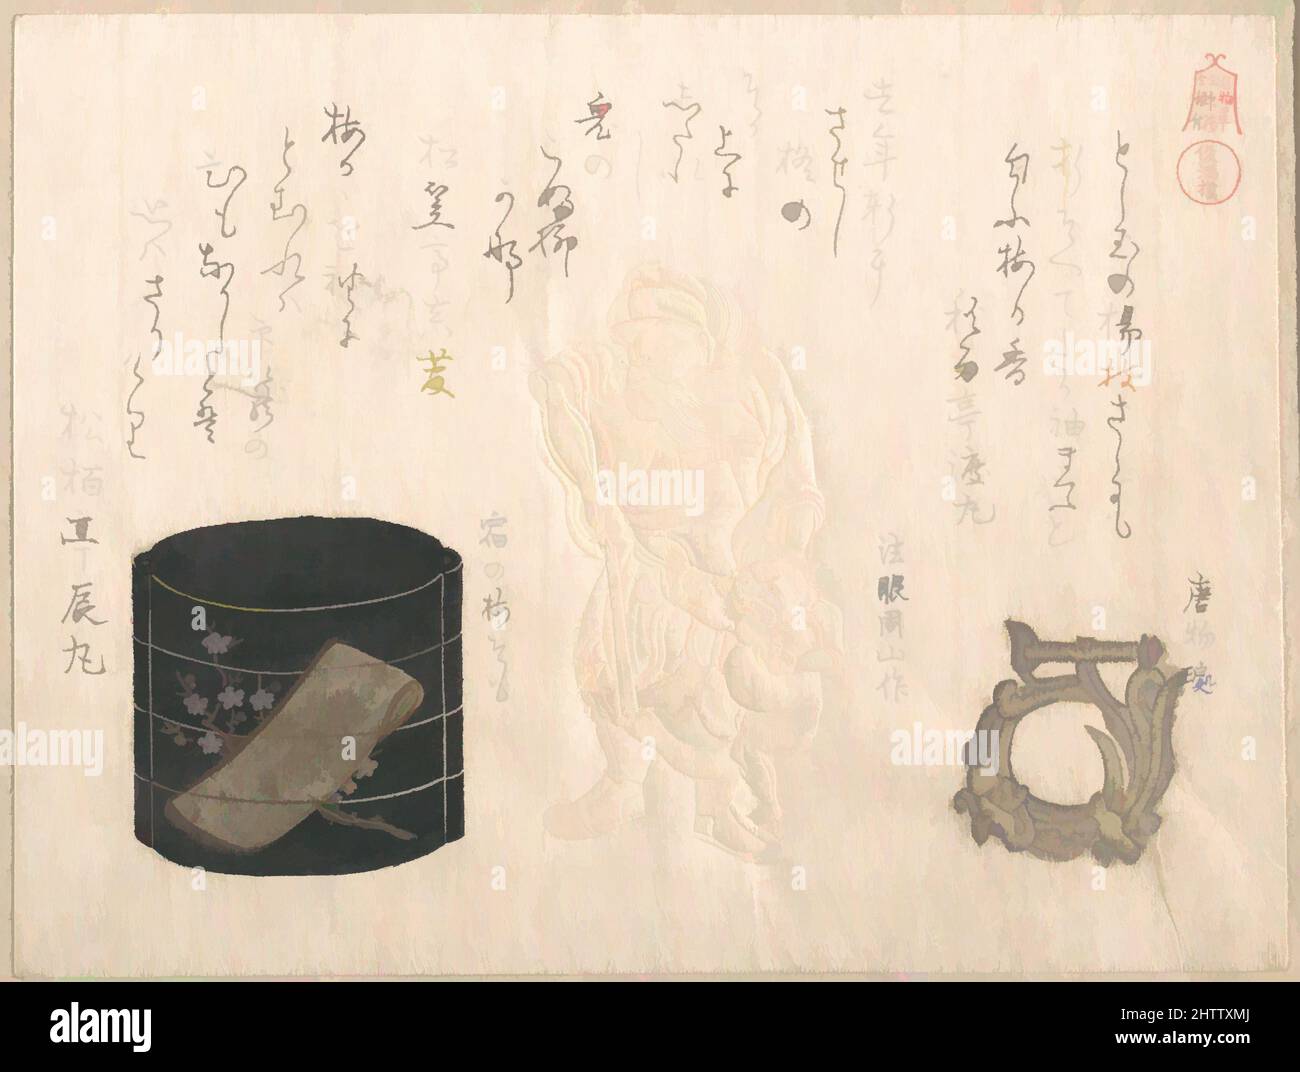 Art inspired by 『名物革仝印籠仝根付』 印籠根付, Edo period (1615–1868), 1810s, Japan, Polychrome woodblock print (surimono); ink and color on paper, 5 7/16 x 7 1/4 in. (13.8 x 18.4 cm), Prints, Kubo Shunman (Japanese, 1757–1820), Surimono are privately published woodblock prints, usually, Classic works modernized by Artotop with a splash of modernity. Shapes, color and value, eye-catching visual impact on art. Emotions through freedom of artworks in a contemporary way. A timeless message pursuing a wildly creative new direction. Artists turning to the digital medium and creating the Artotop NFT Stock Photo